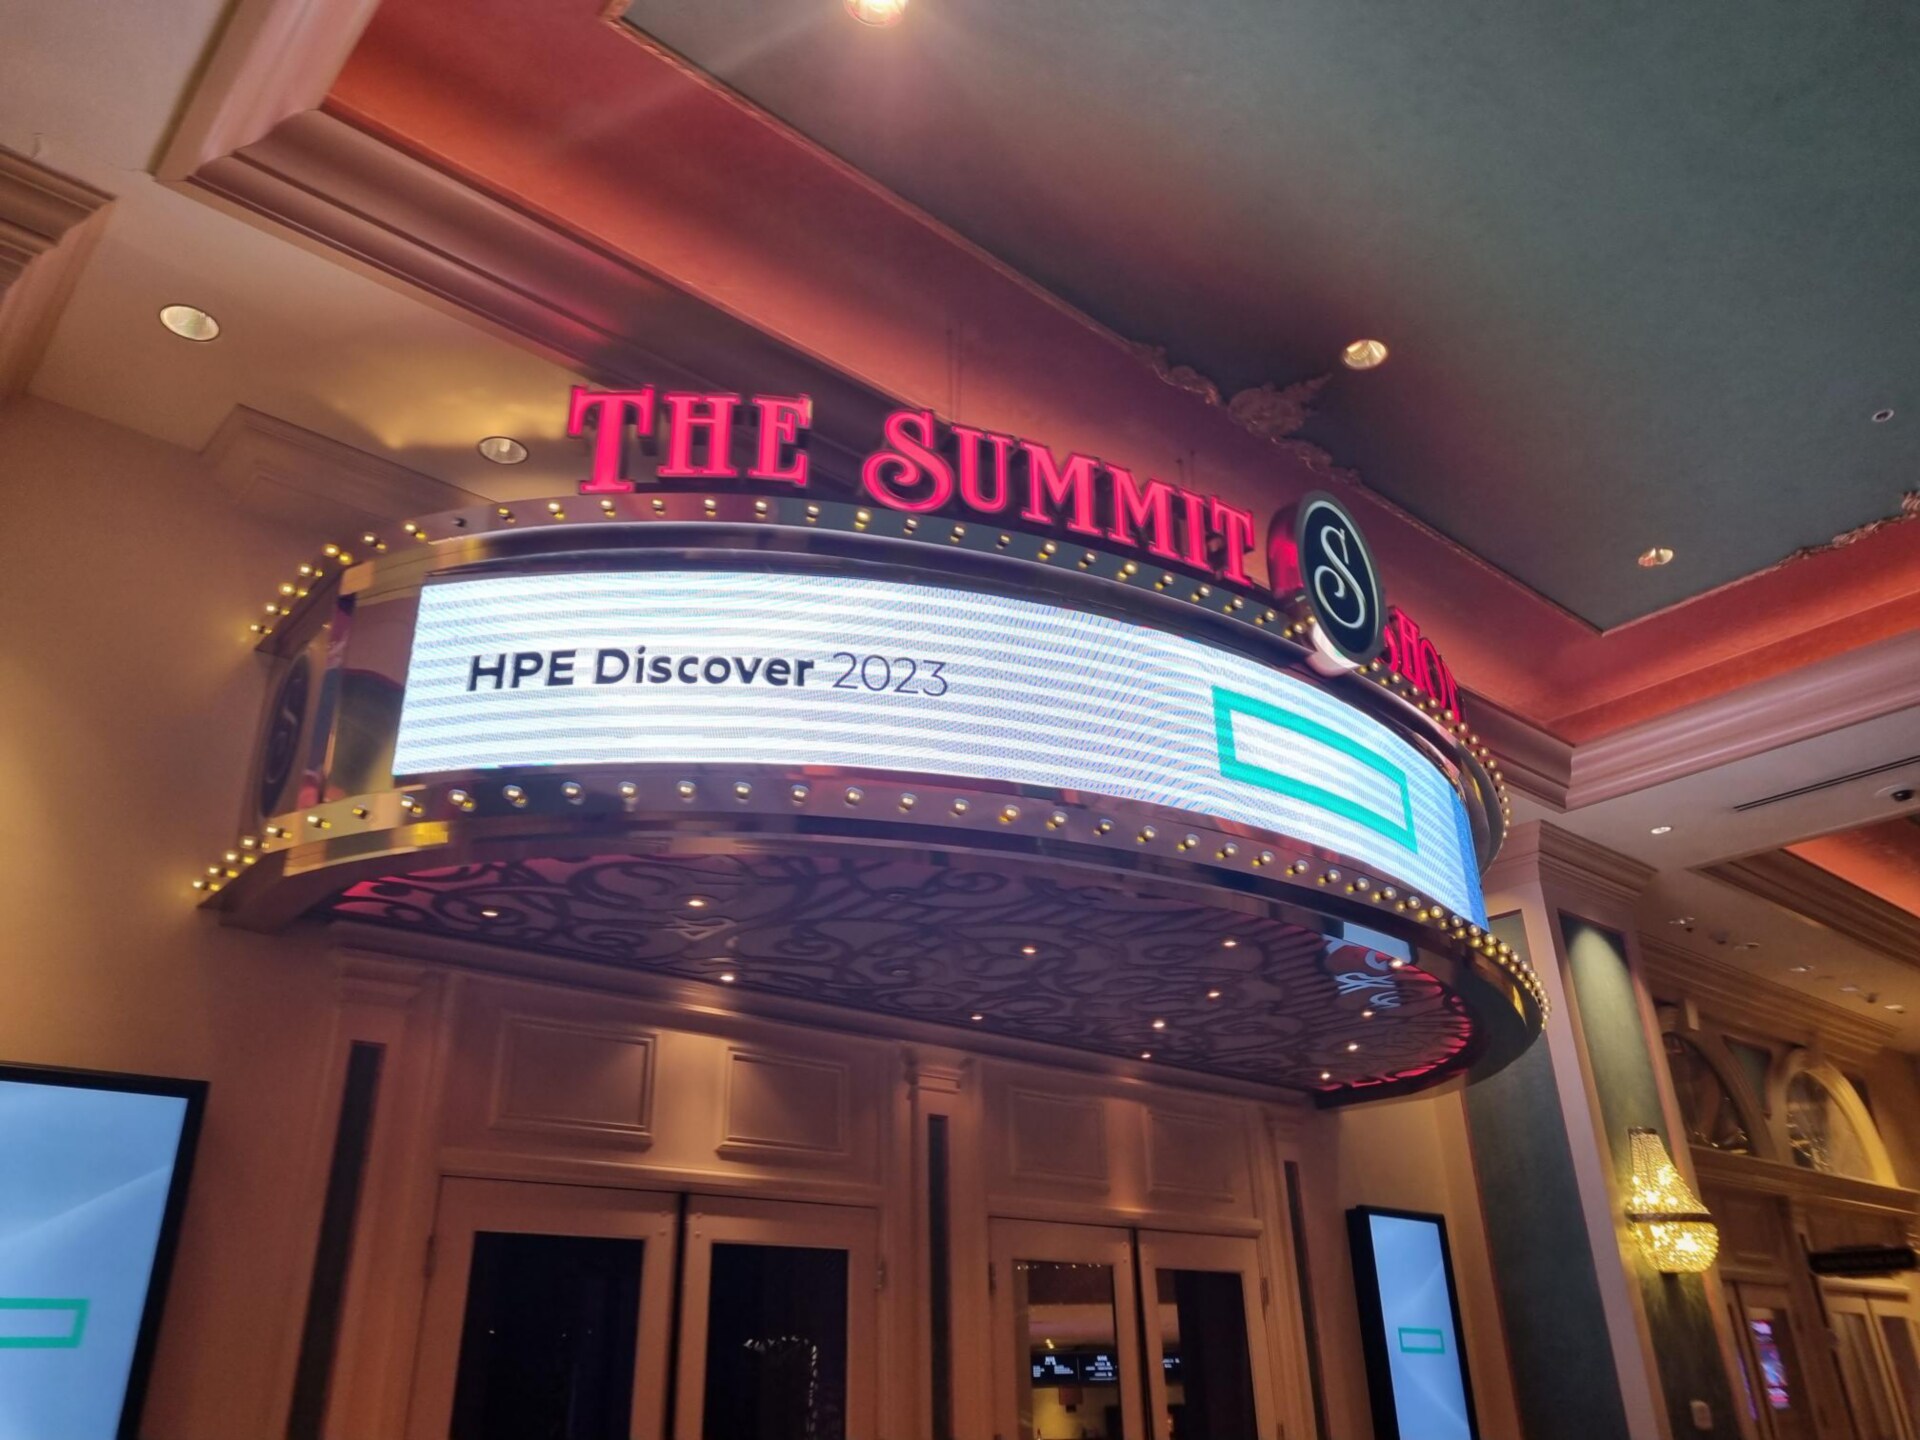 HPE Discover summit 2023